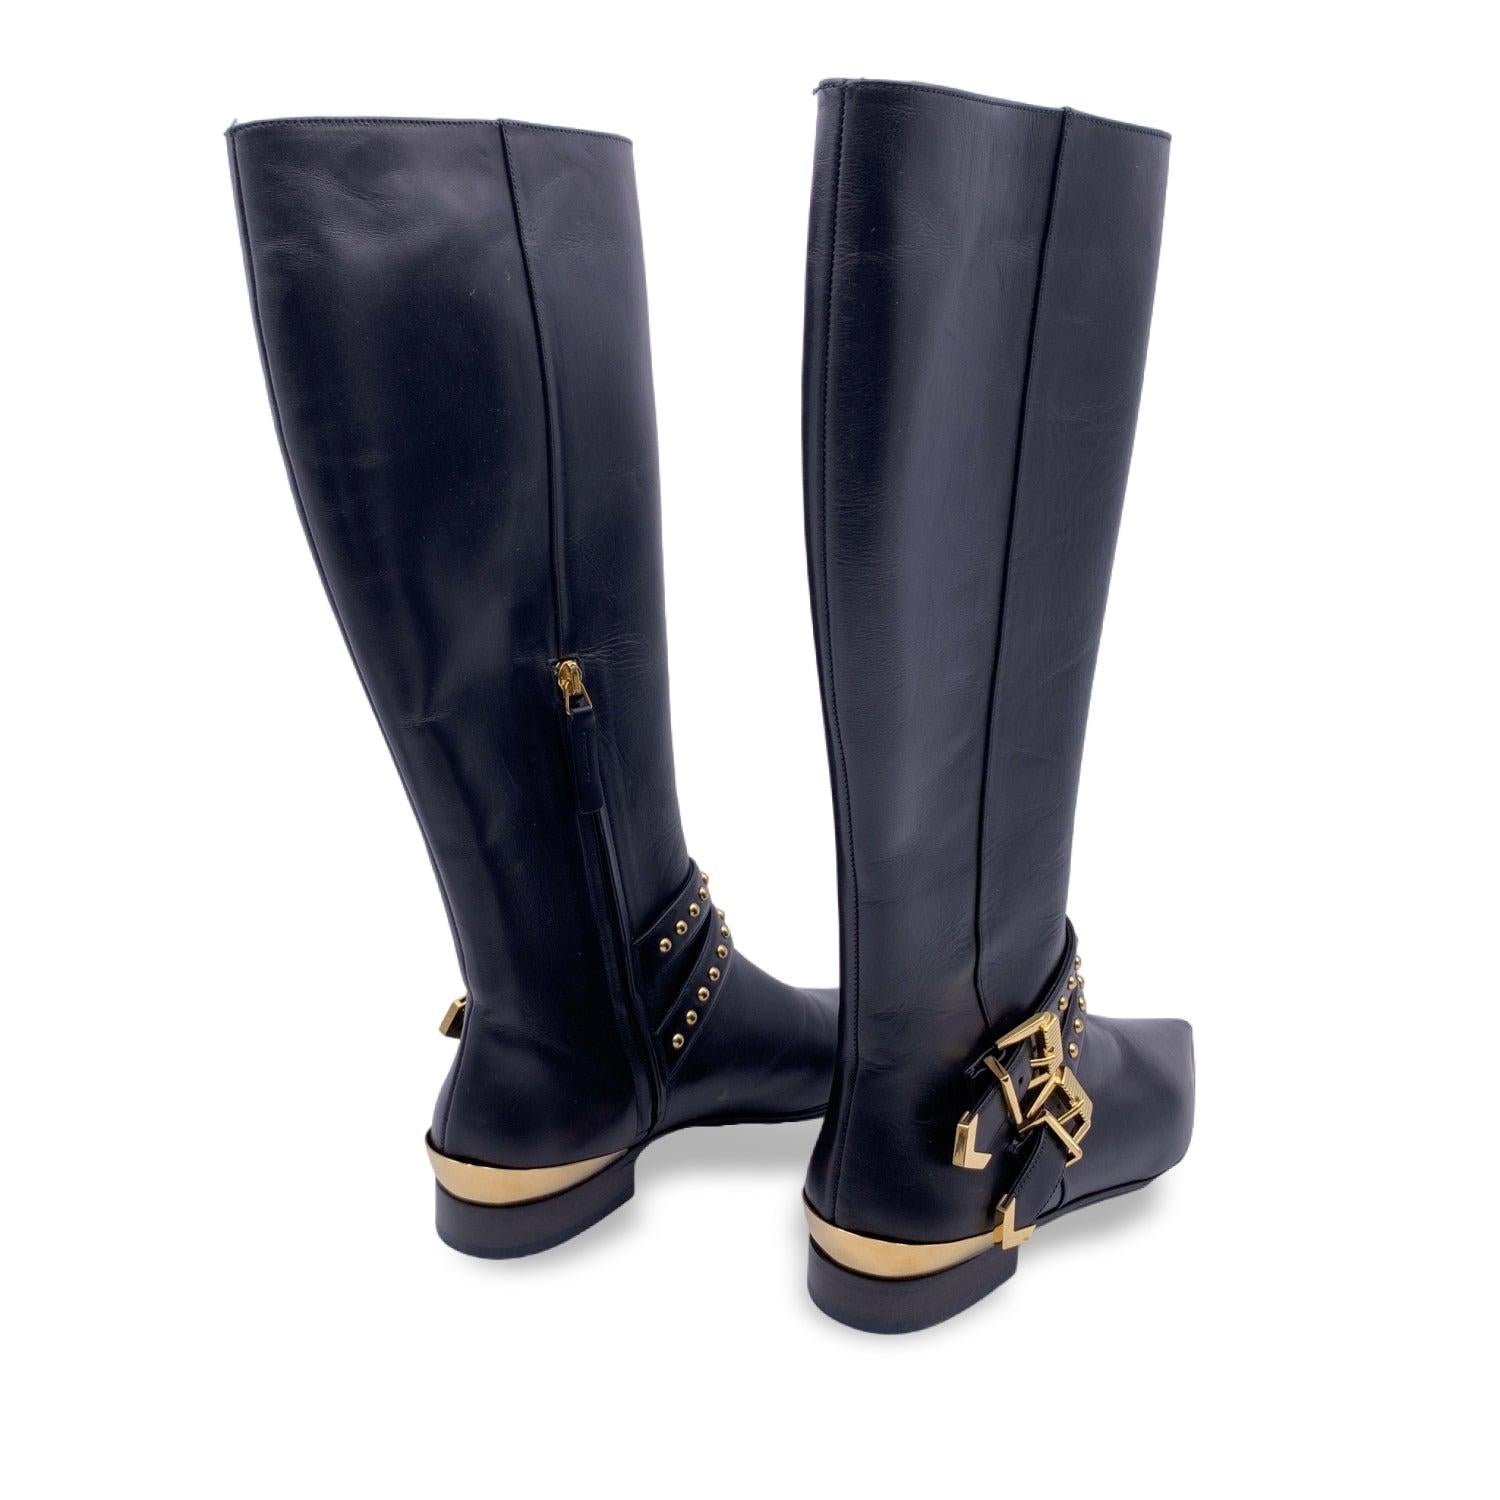 Versace black leather boot. It features gold metal detailing such as studs, 2 buckles at the ankle and the pointed toes. Zip closure internally. Size: EU 6 (The size shown for this item is the size indicated by the designer on the shoes). Made in